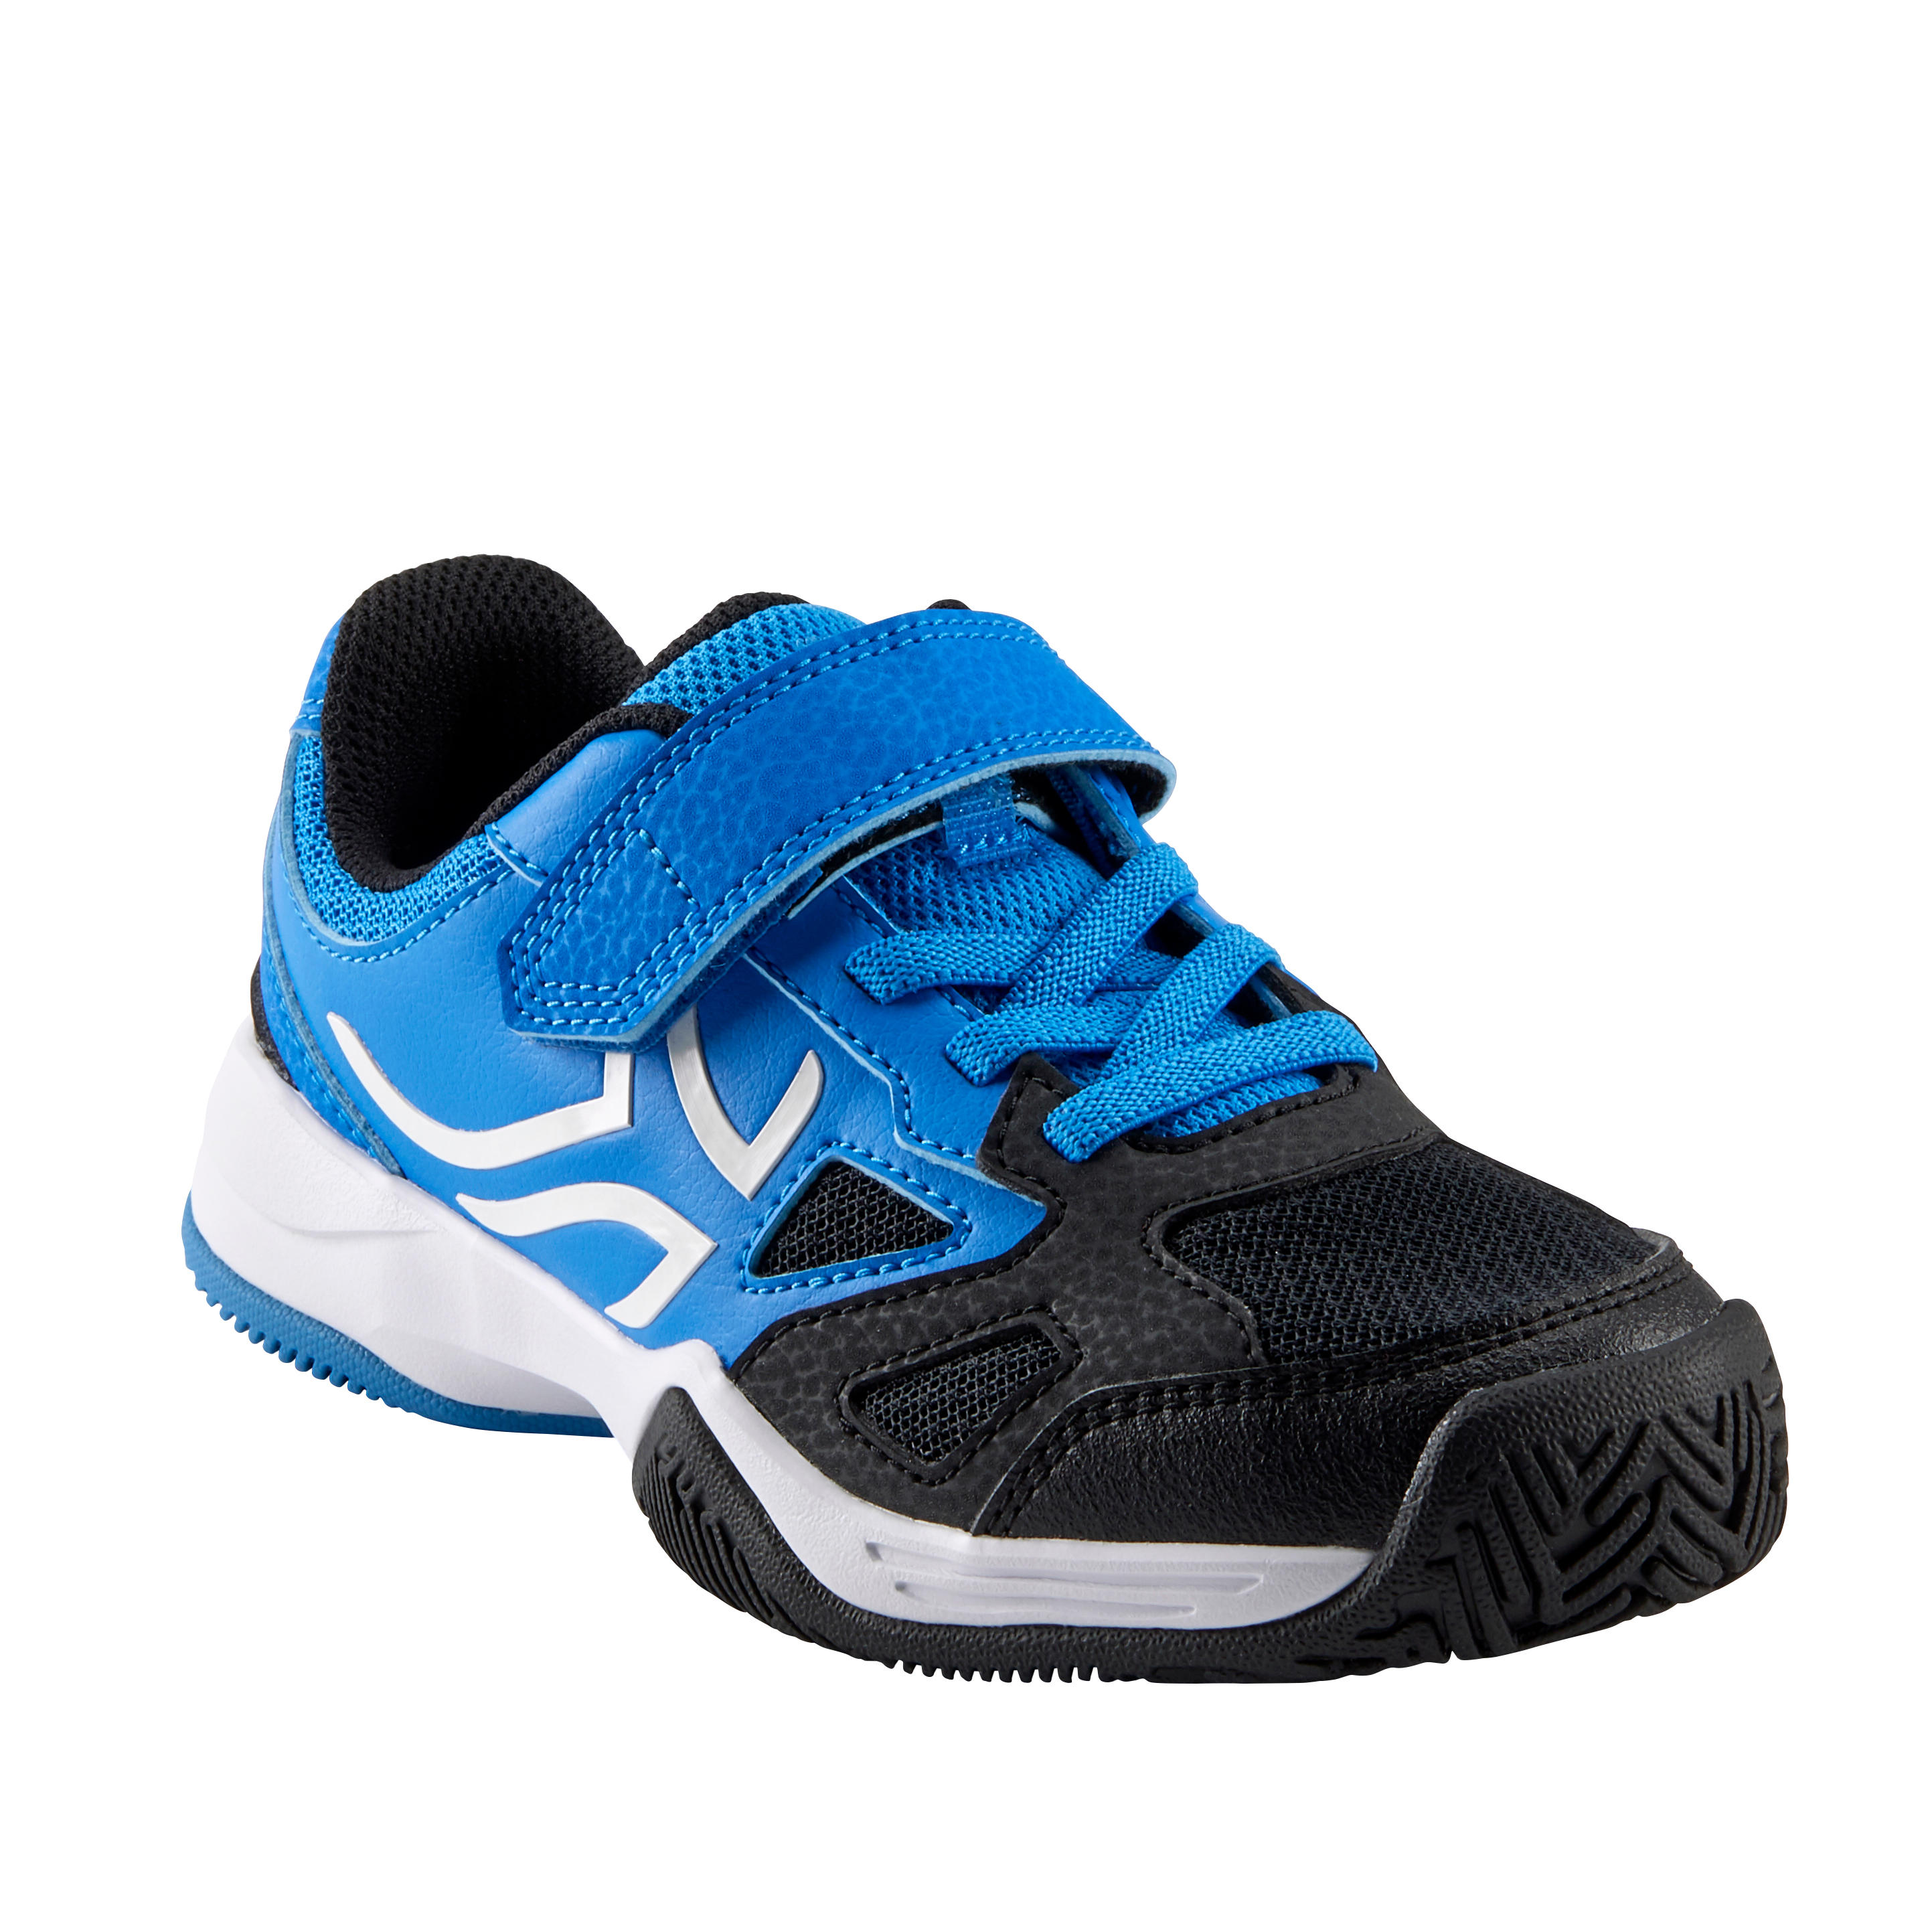 perfly shoes review